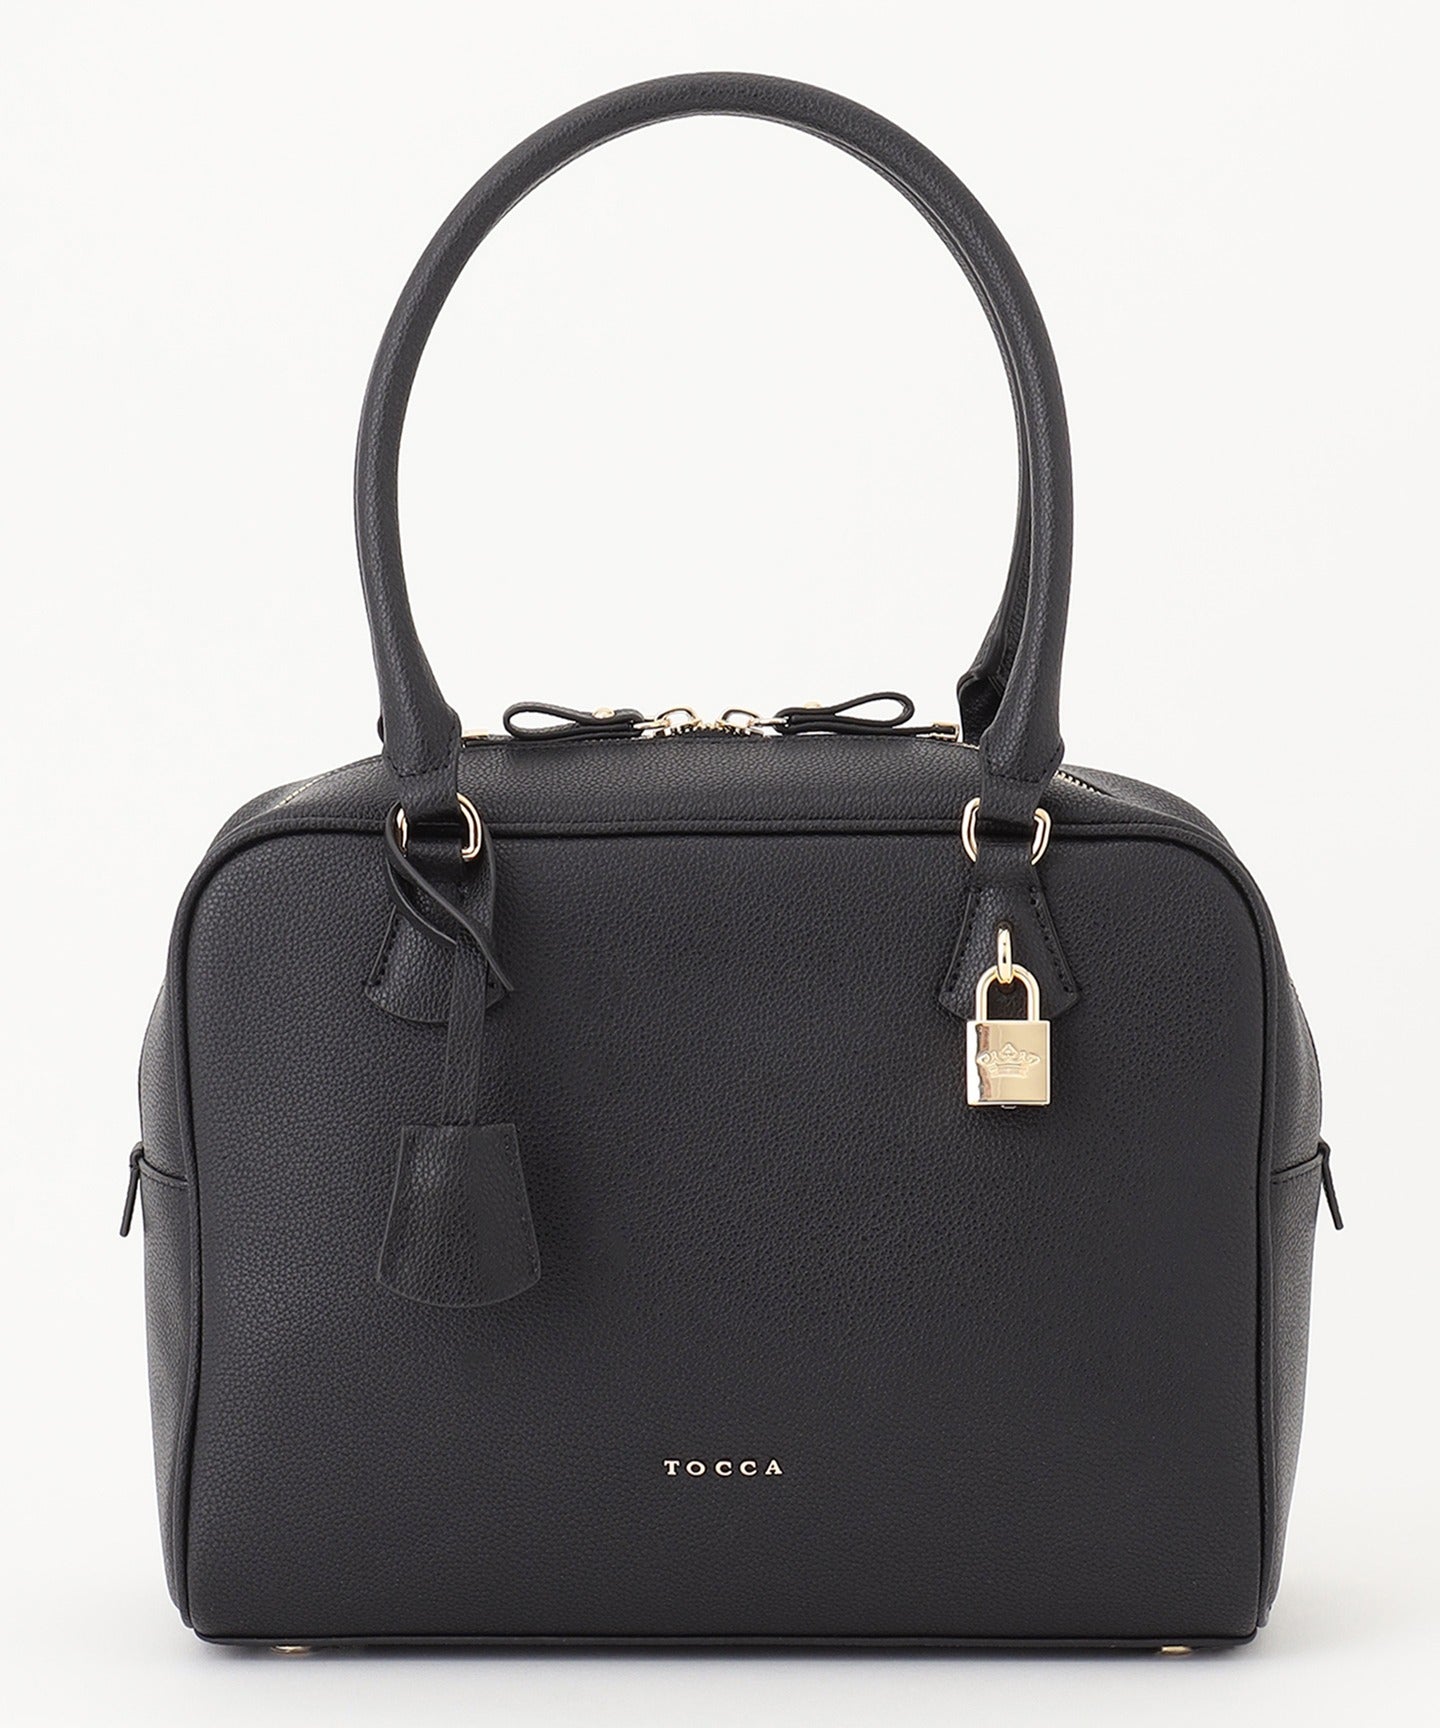 HAPPY KEY BOSTONBAG – TOCCA OFFICIAL SITE